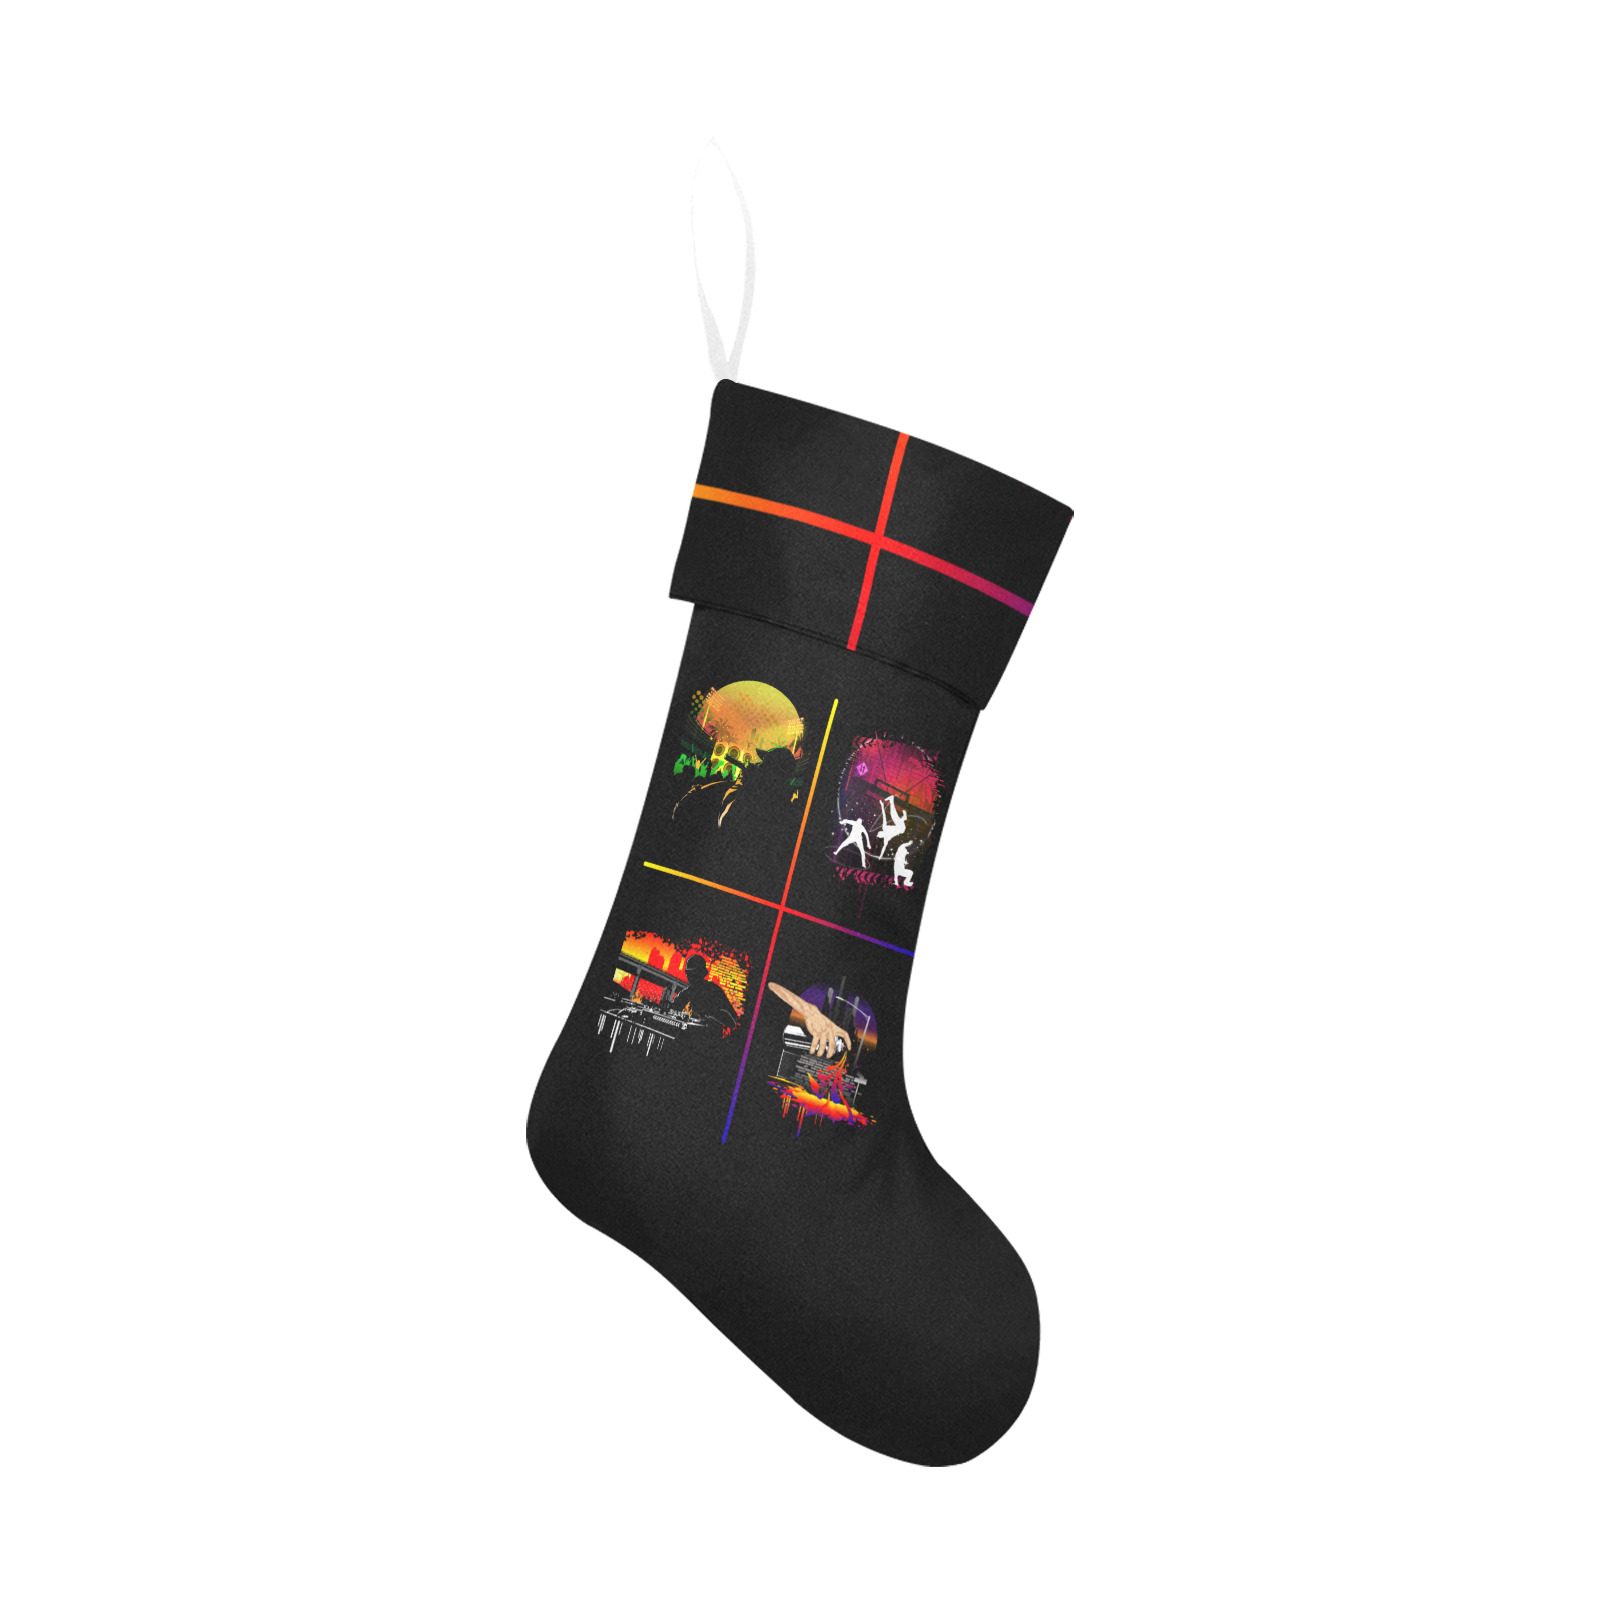 Essential Elements Christmas Stocking